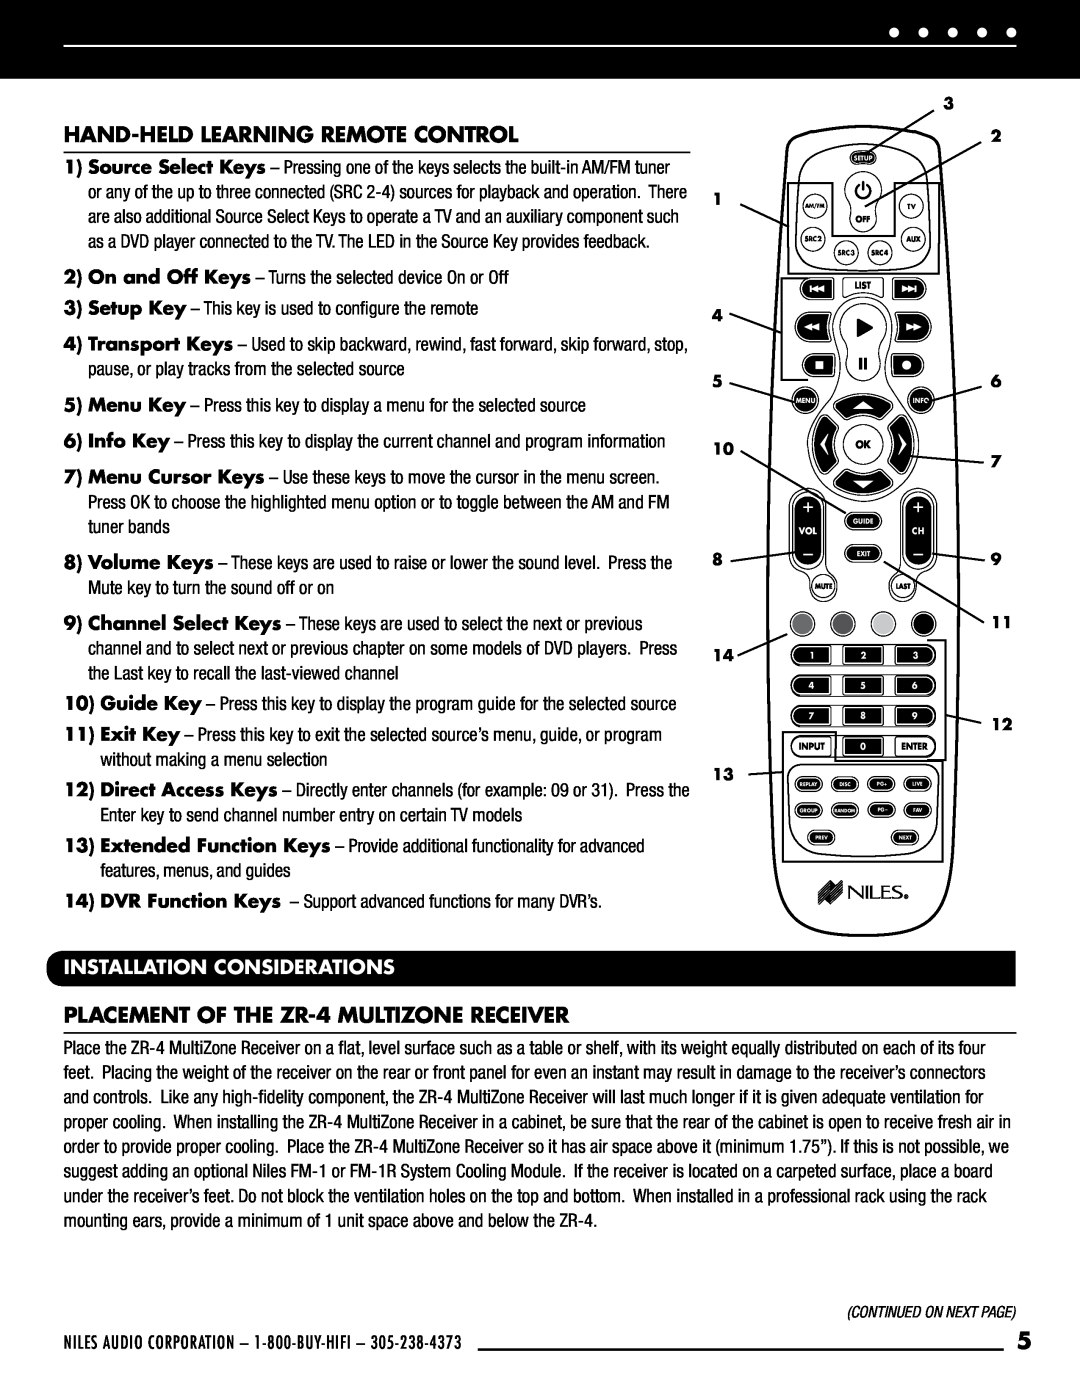 Niles Audio PLACEMENT OF THE ZR-4MULTIZONE RECEIVER, Installation Considerations, Hand-HeldLearning Remote Control 